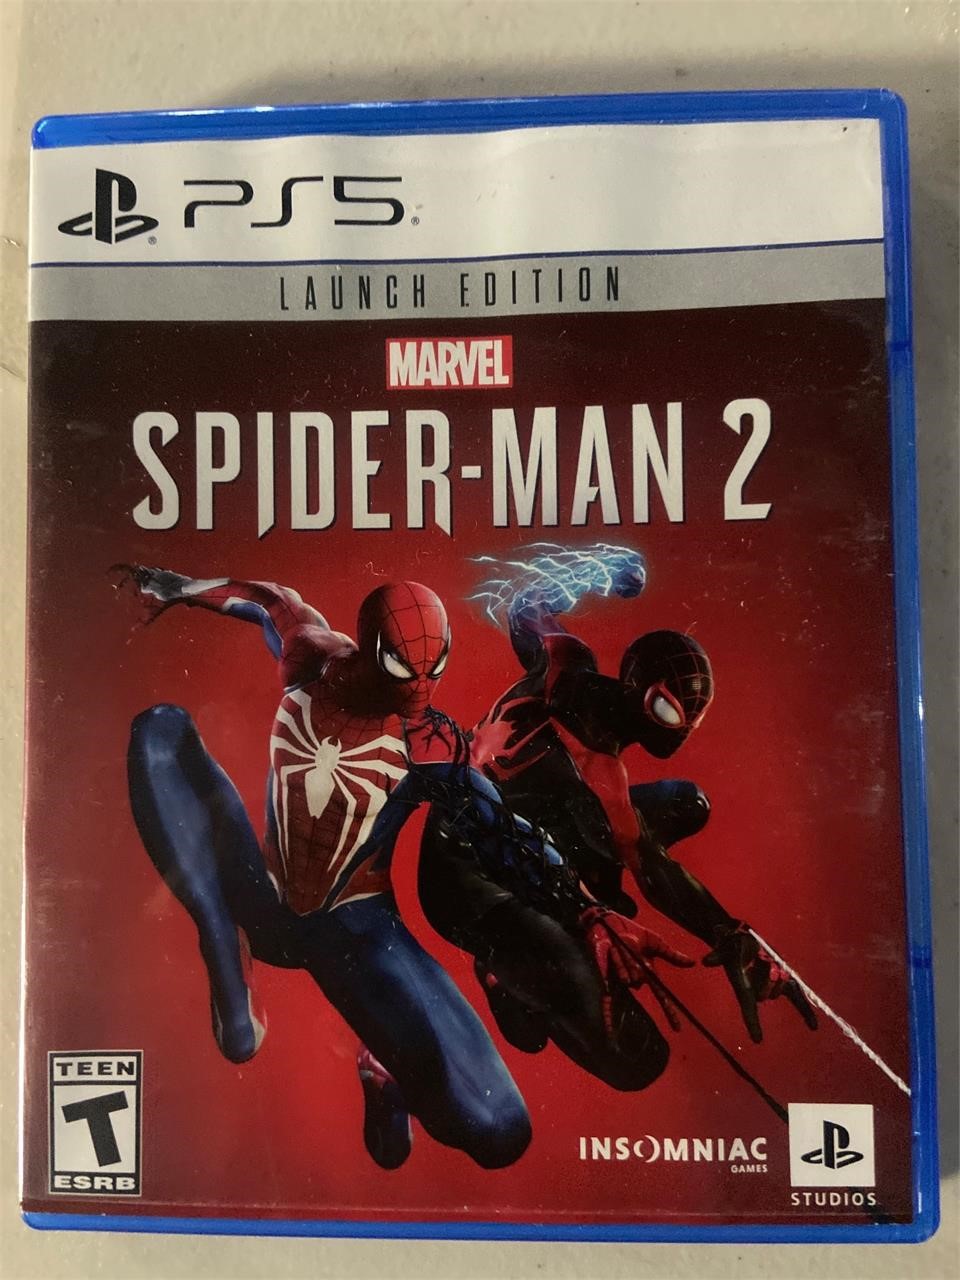 $59 Ps5 Spider-Man 2 launch edition